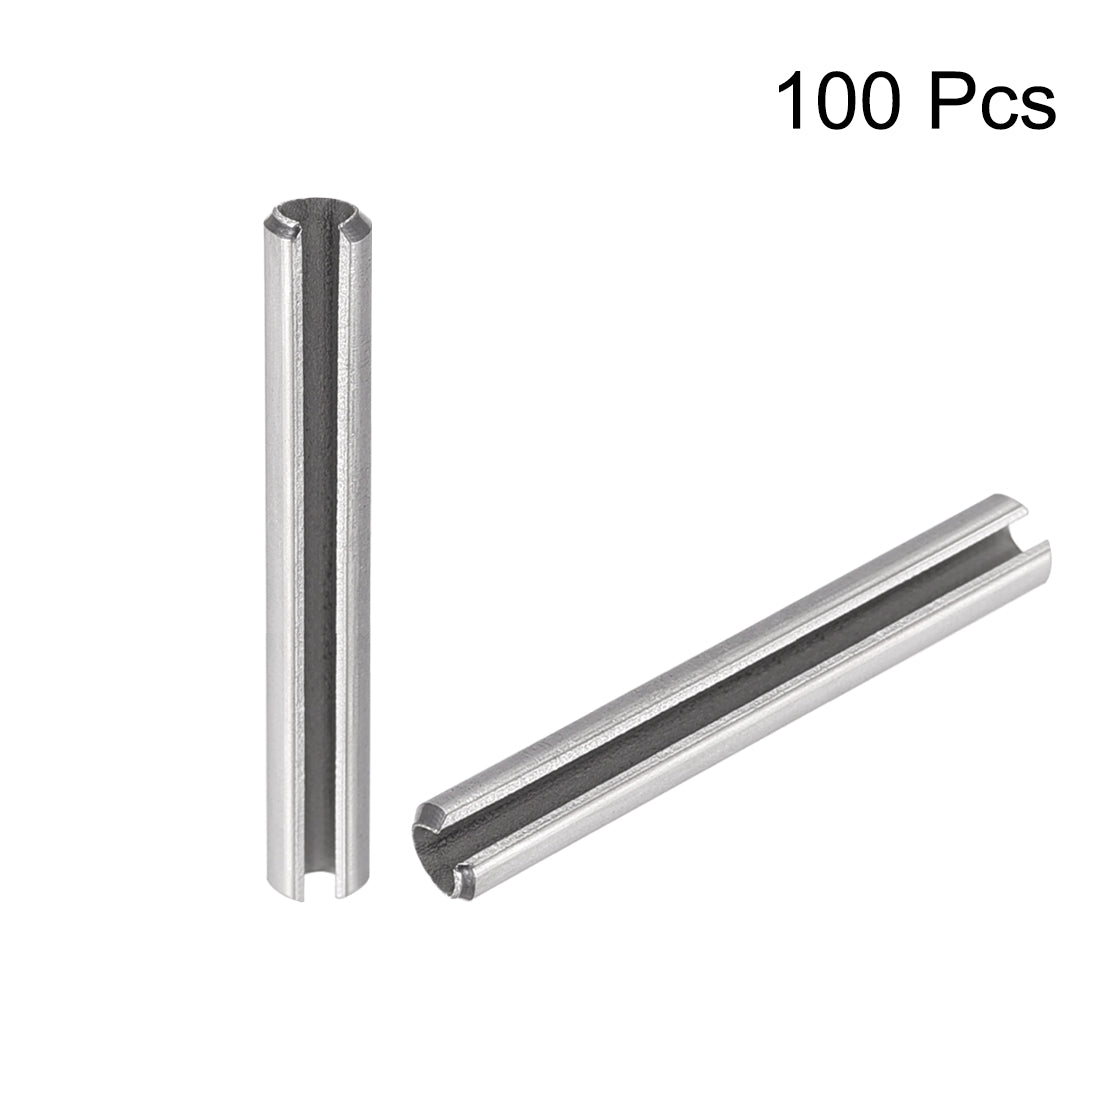 Uxcell Uxcell M2 x 16mm 304 Stainless Steel Split Spring Roll Dowel Pins Plain Finish 100Pcs